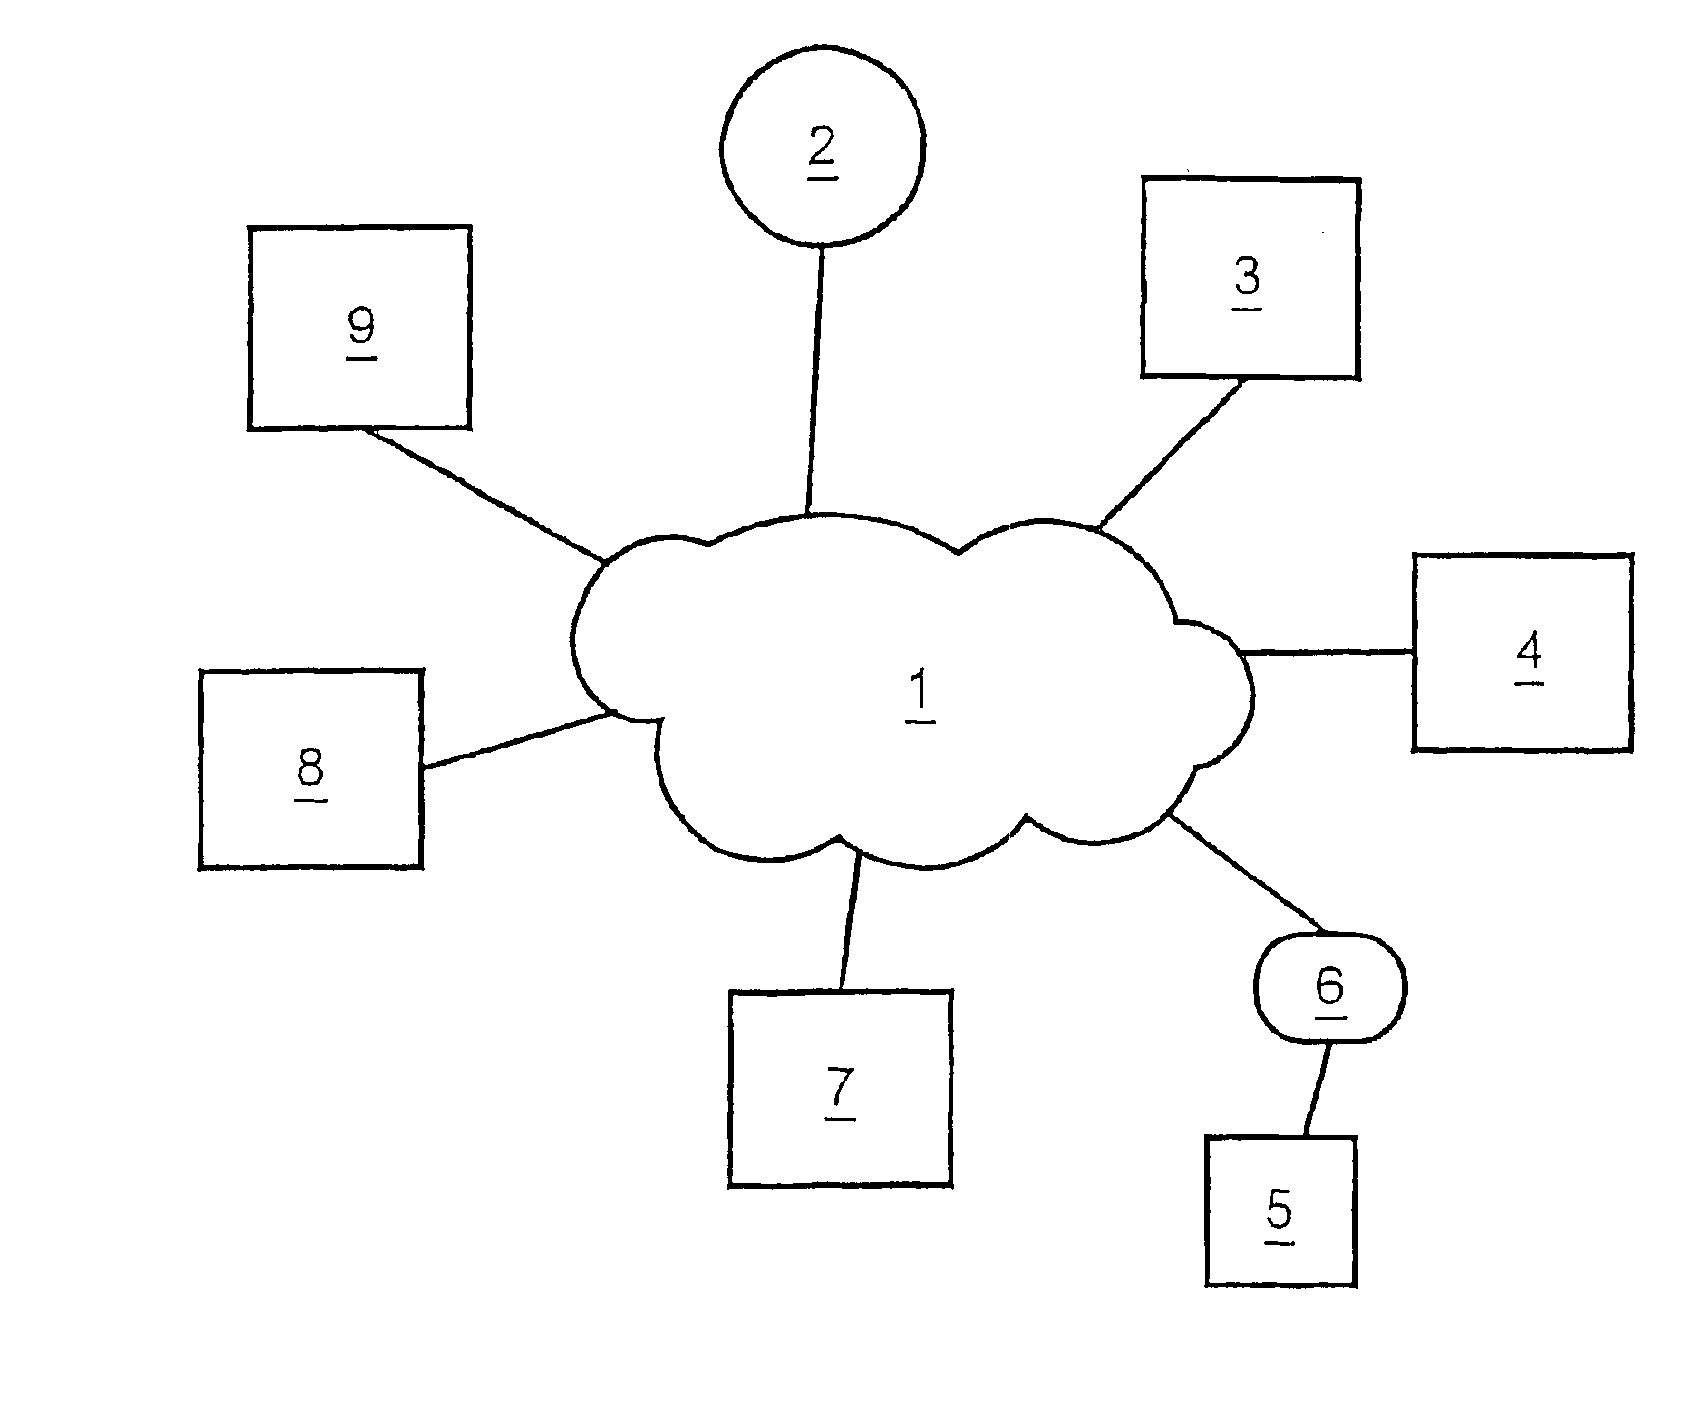 Server for mapping application names to tag values in distributed multi-user application